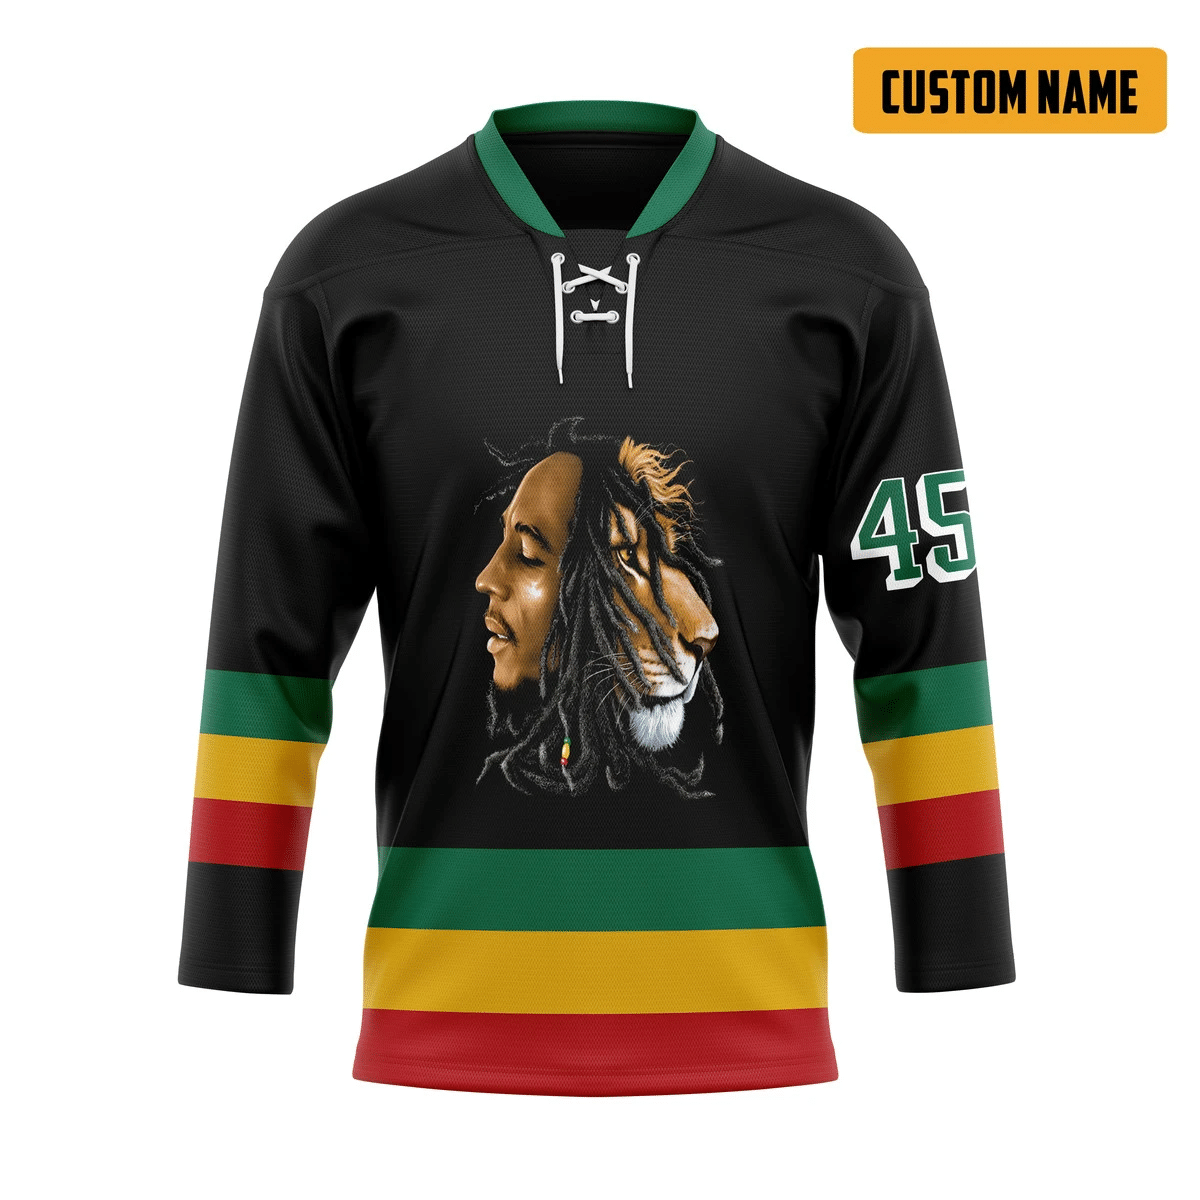 Check out our collection of unique and stylish hockey jerseys from all over the world 47